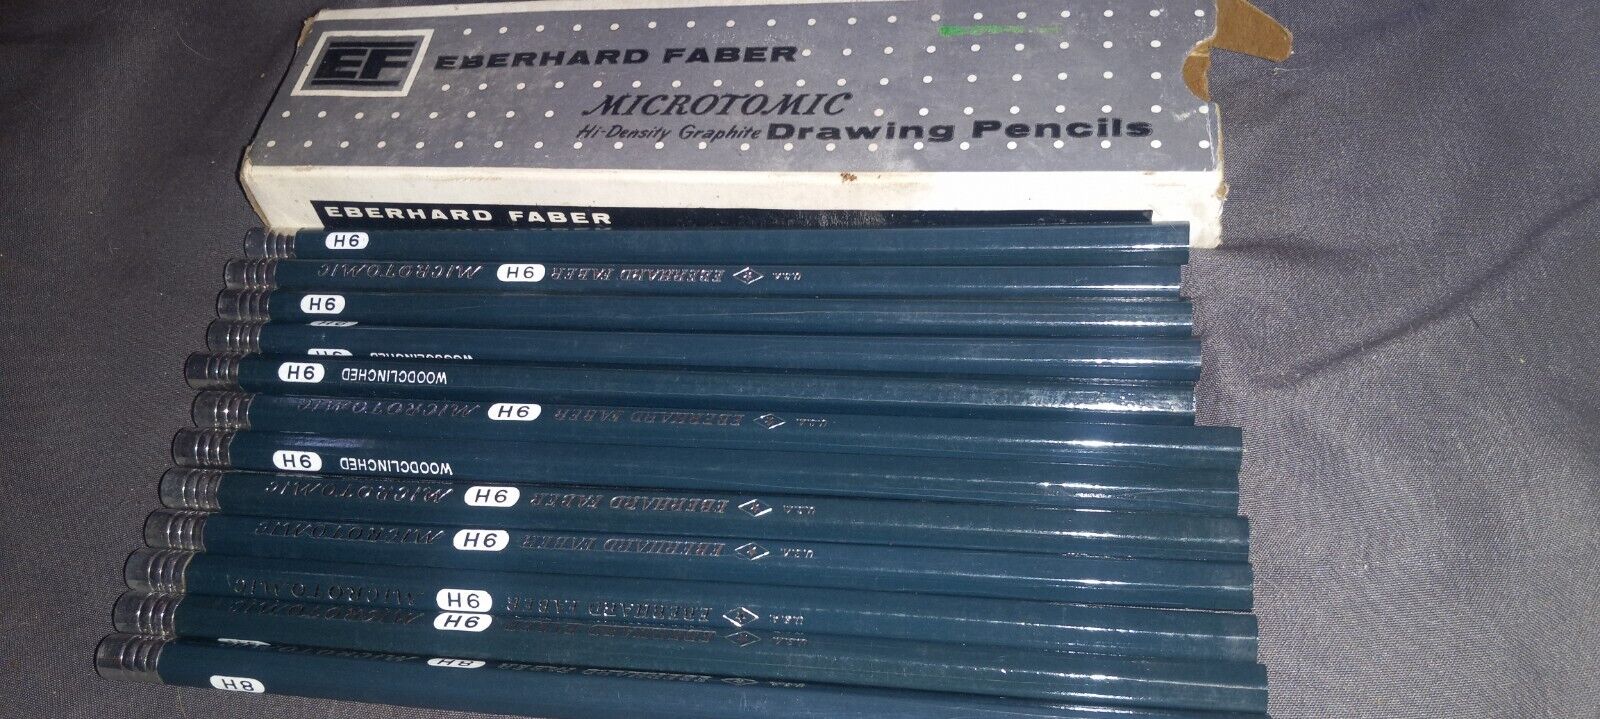 Vintage Eberhard Faber Microtomic 9 H Drawing Pencils Set of 12 with Box